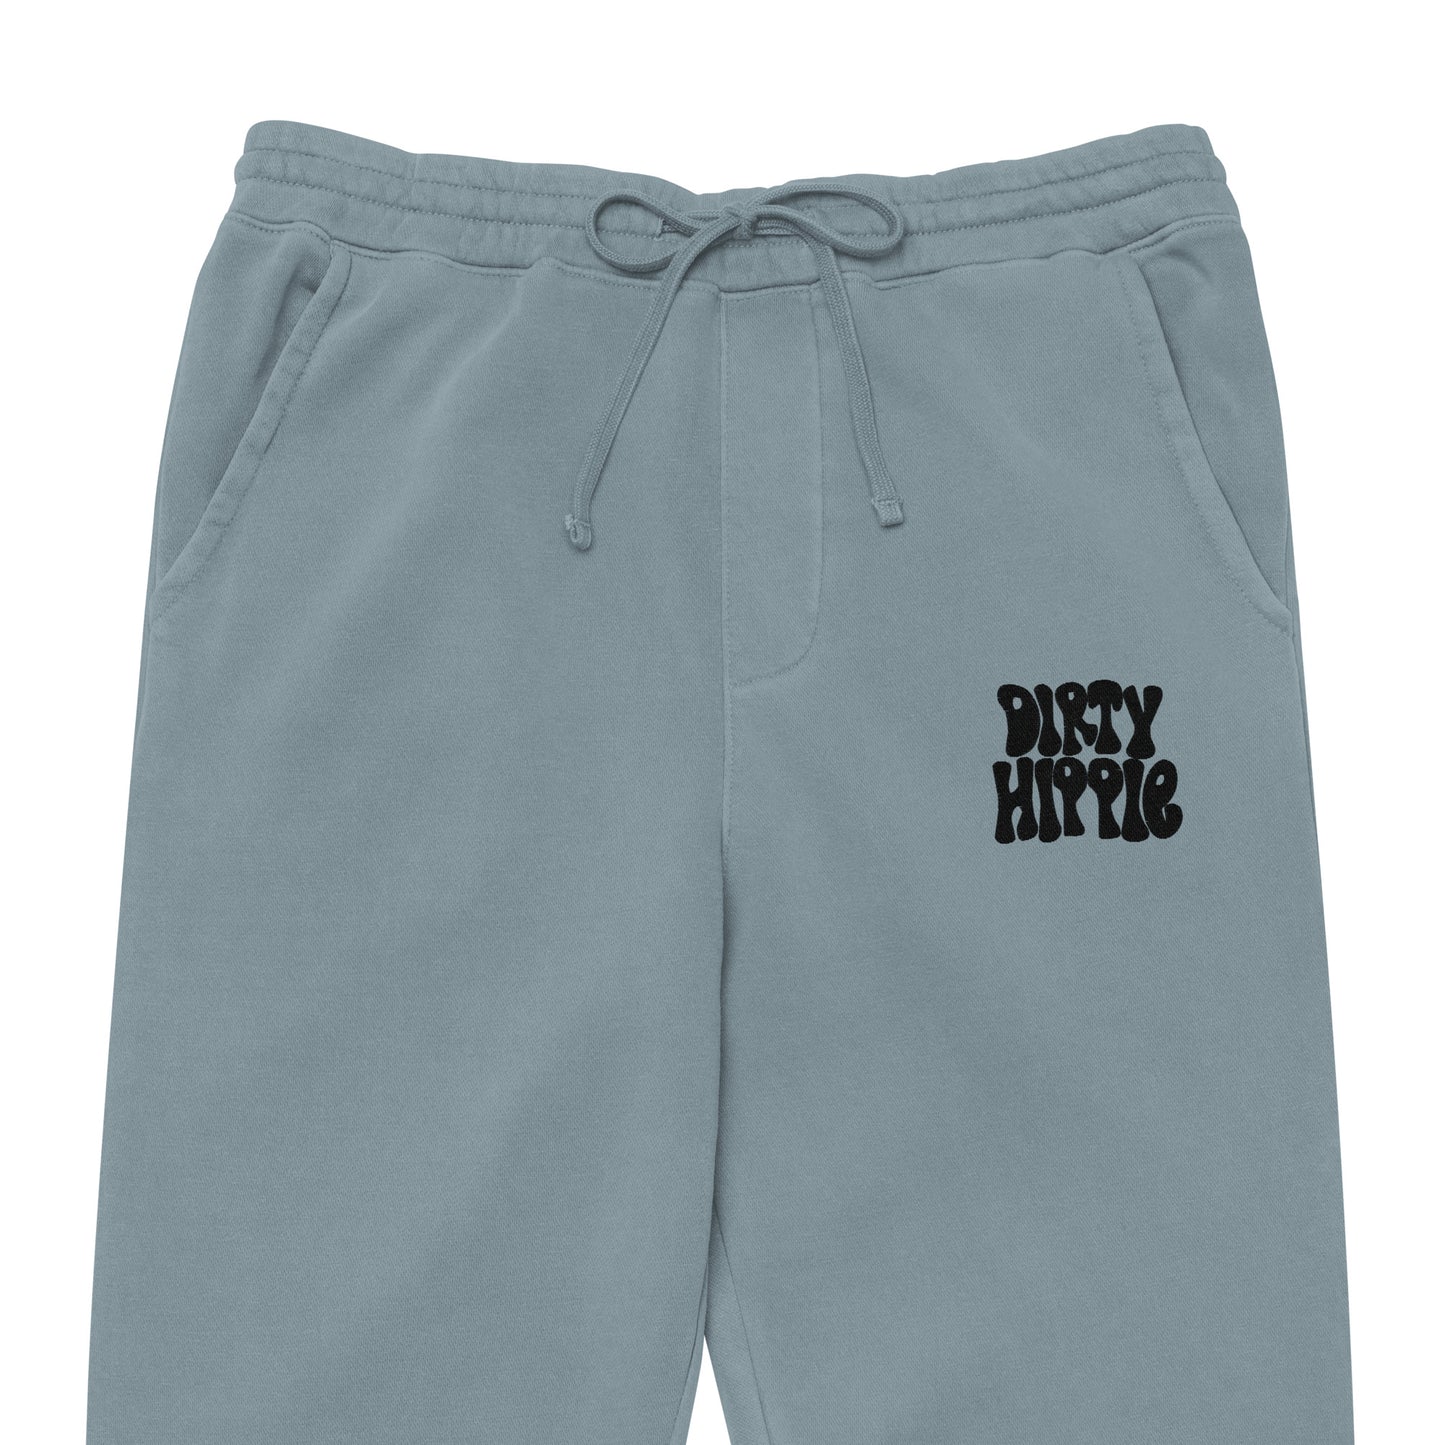 dirty hippie pigment-dyed sweatpants